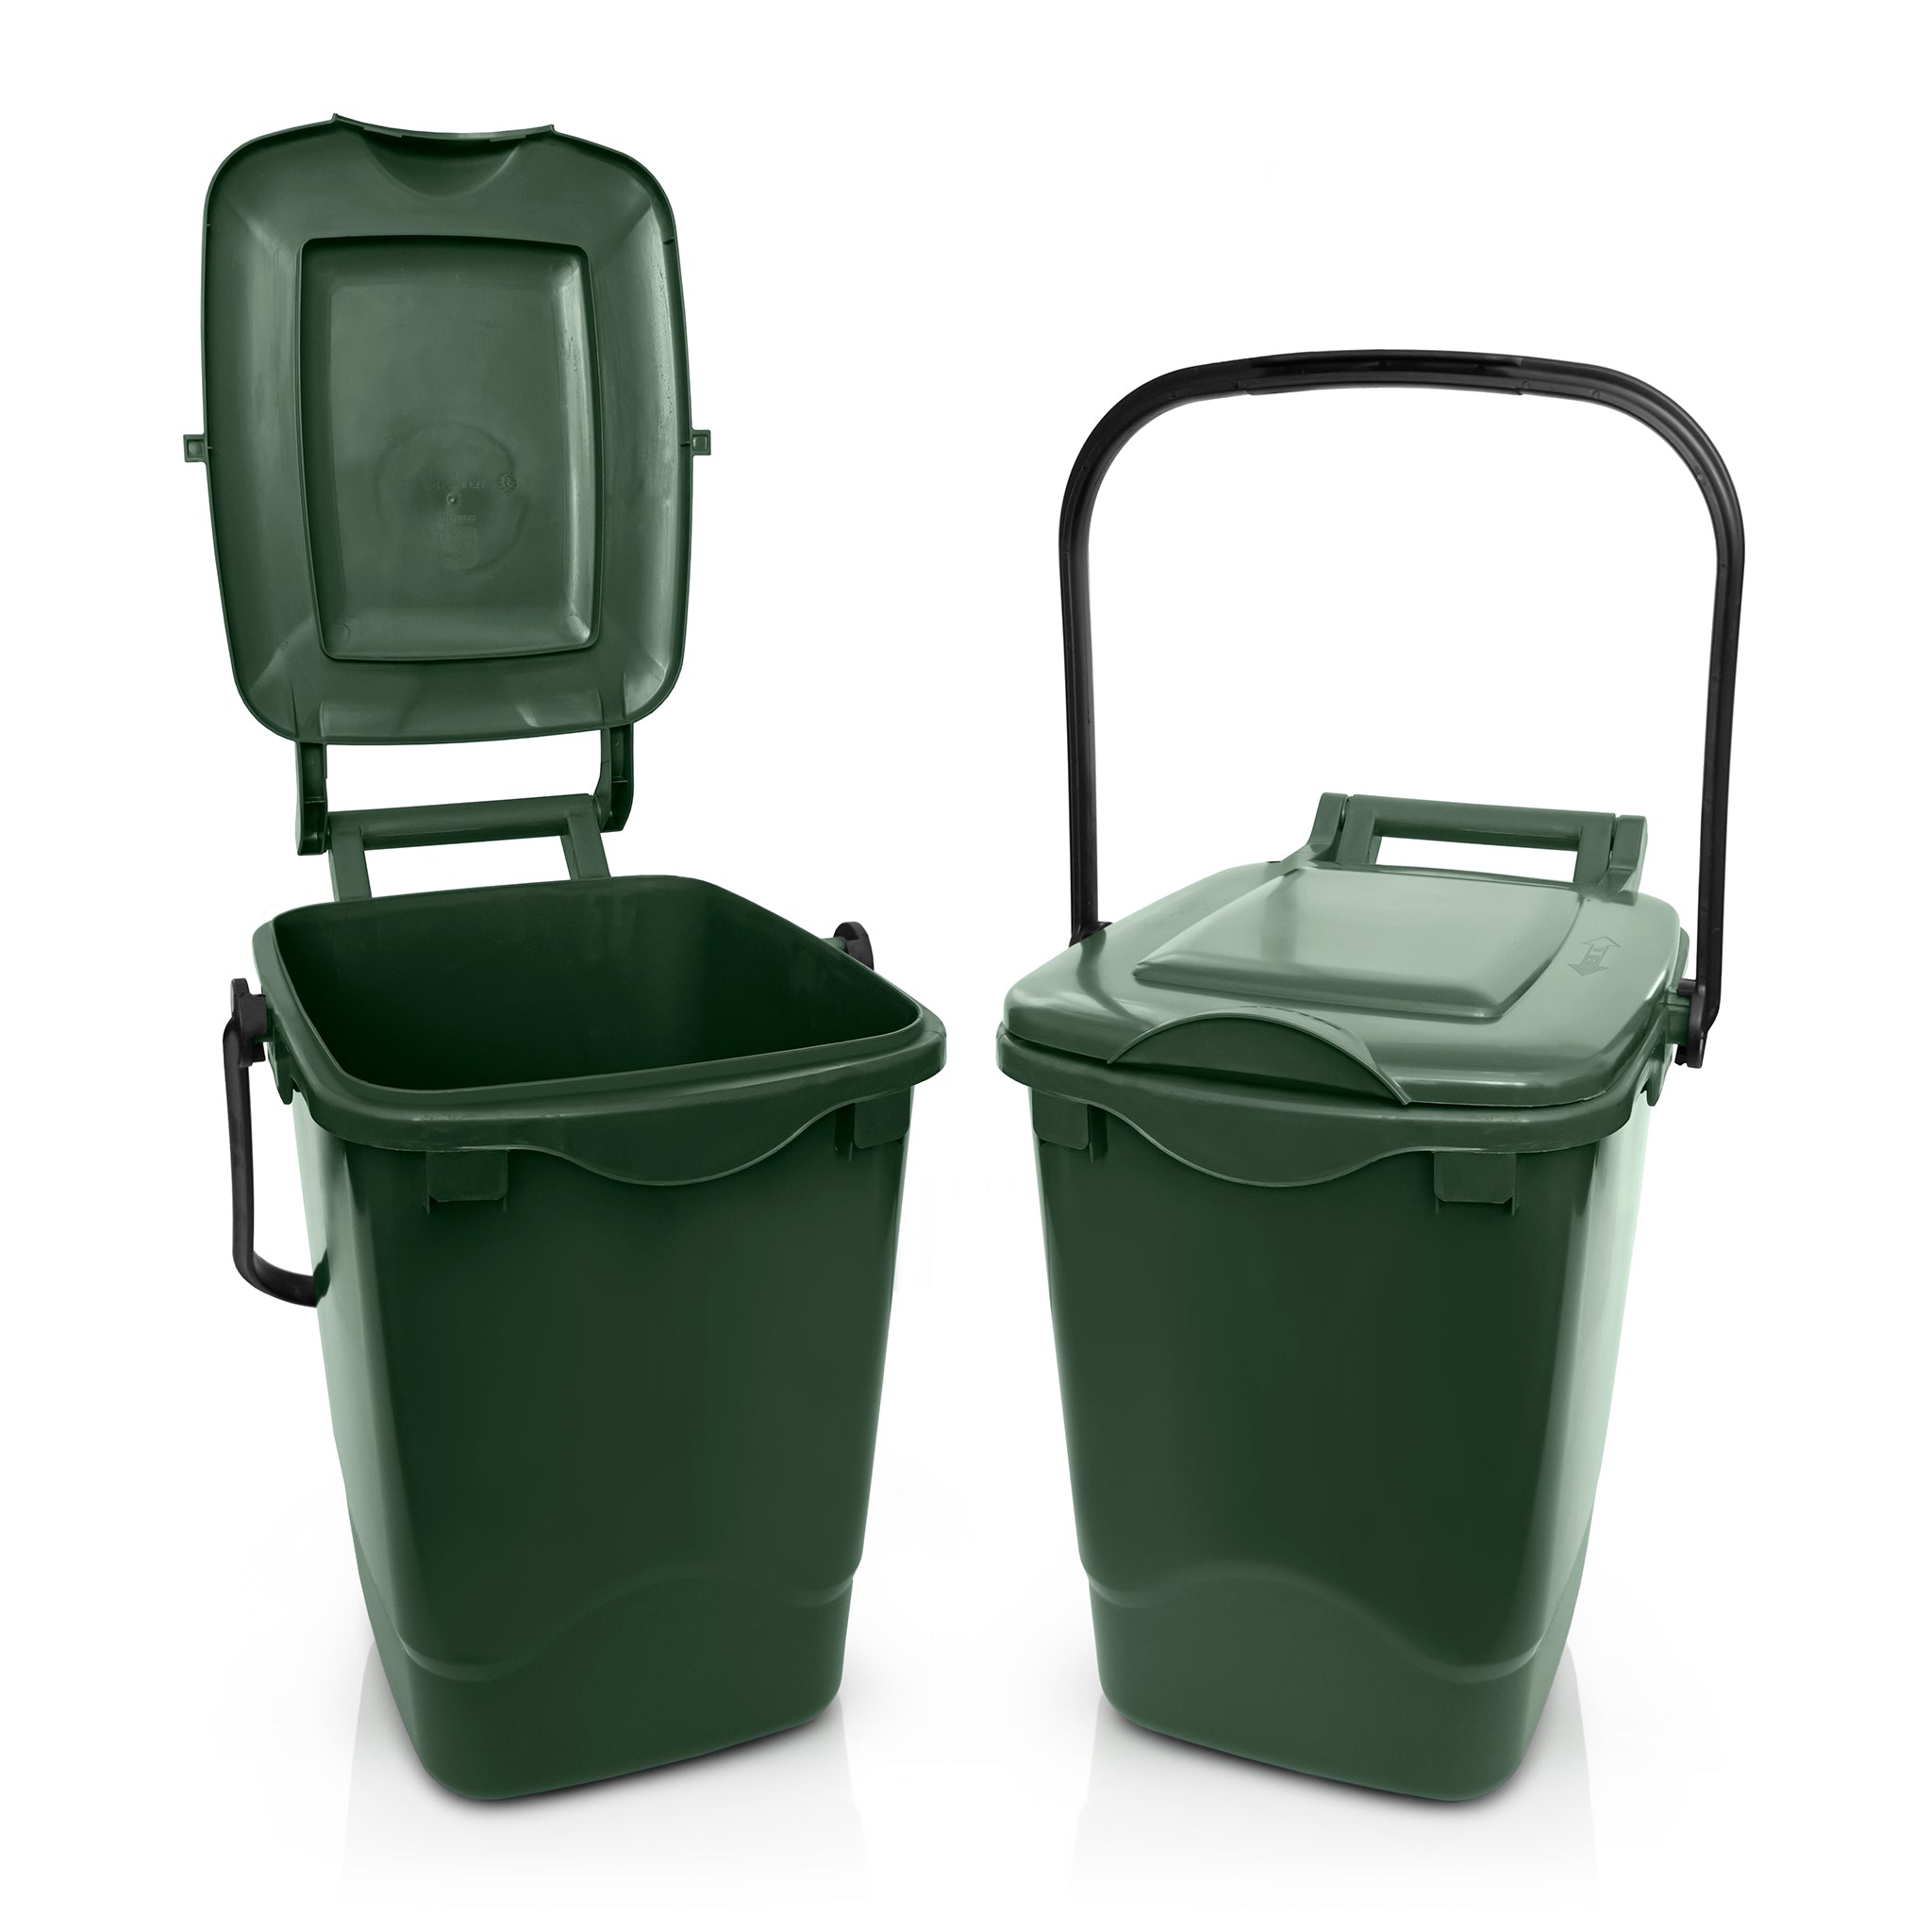 Green bins made form 100% recycled plastic on a white background